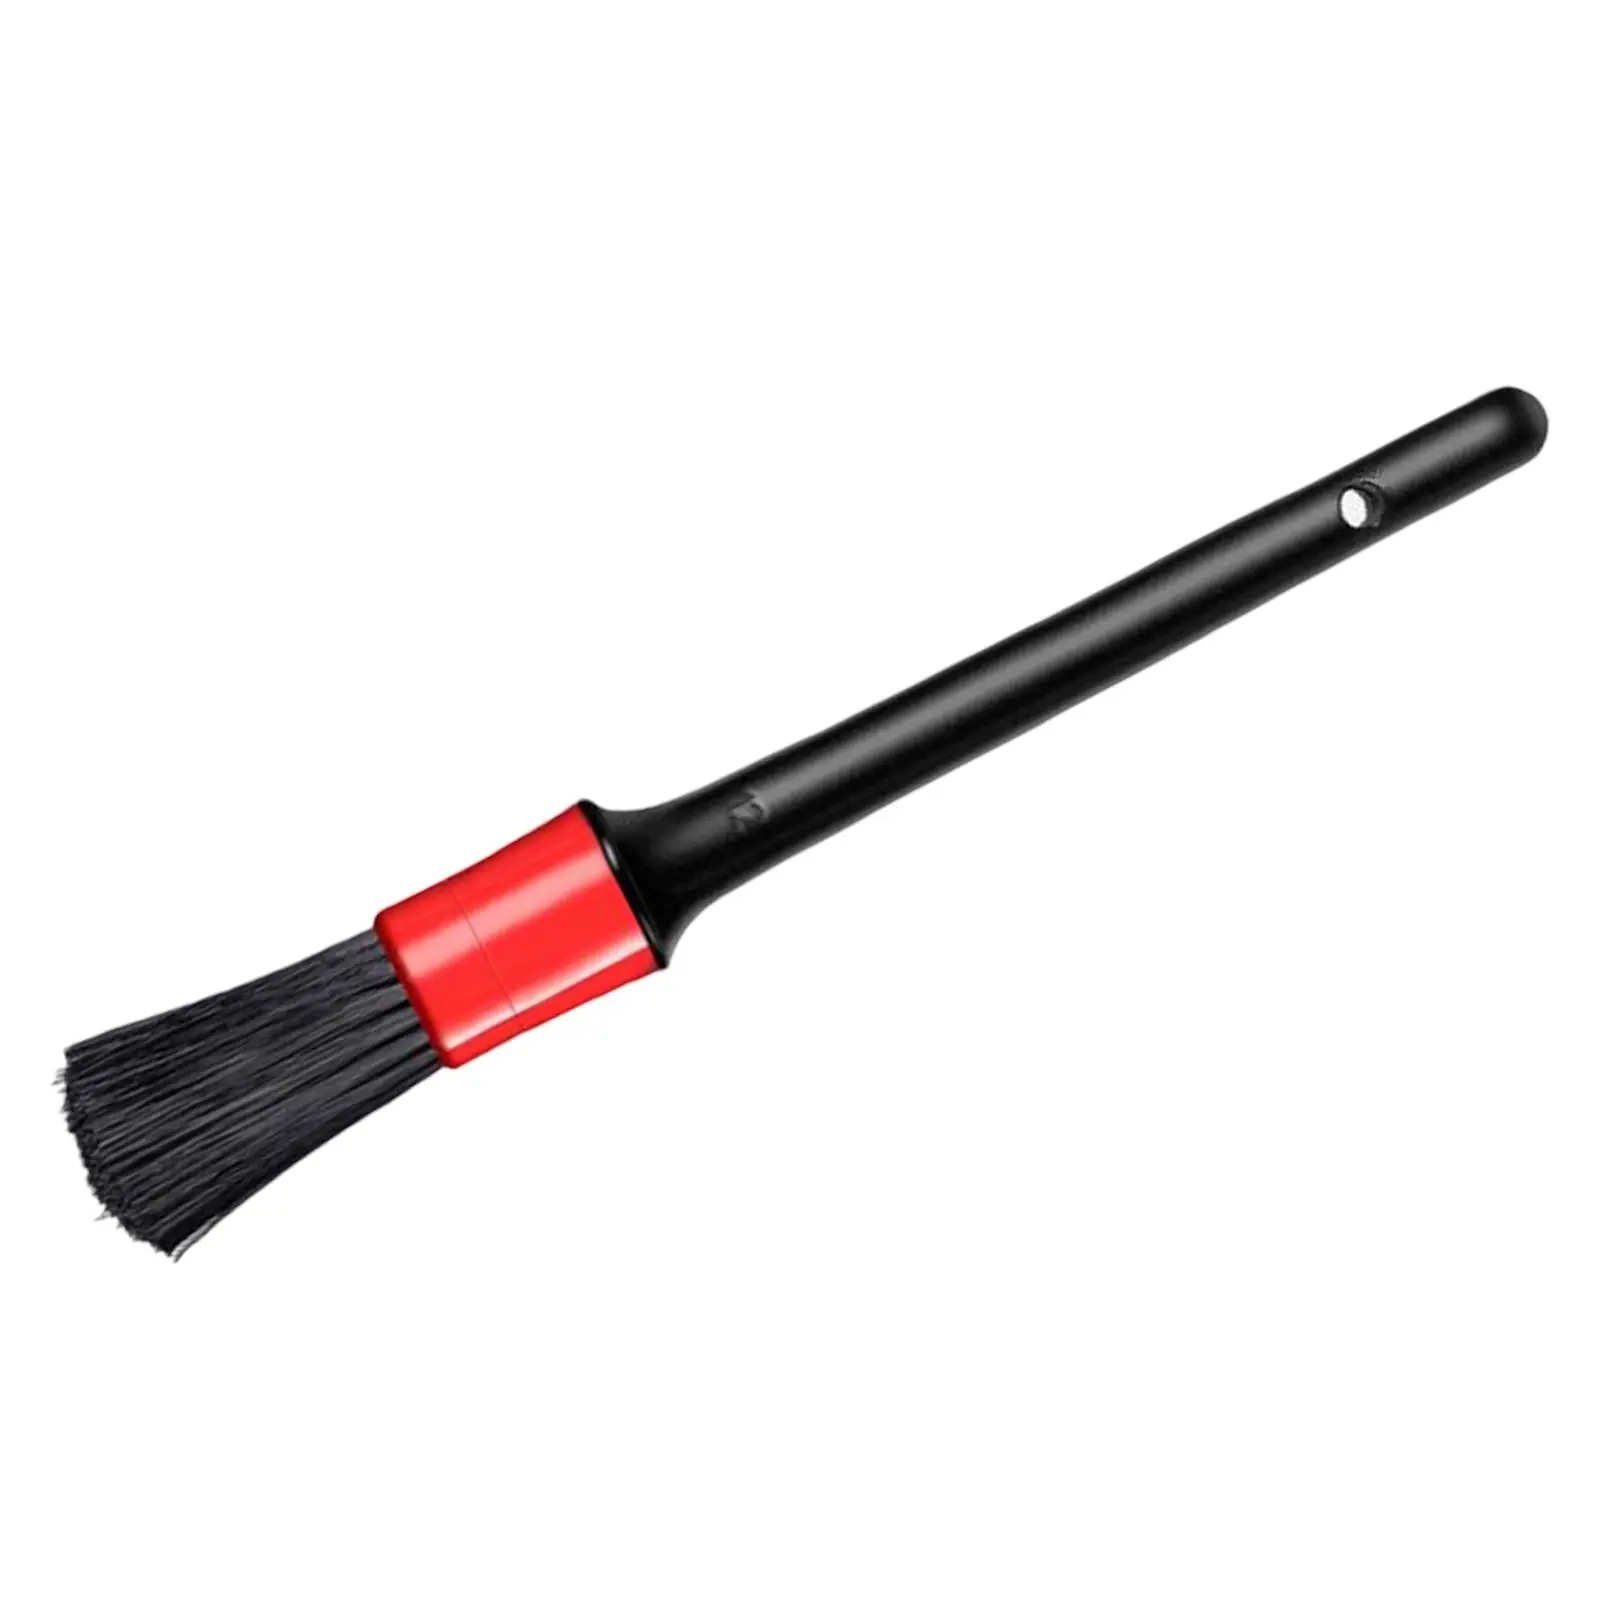 2X Car Detail Brush Accessories for Interior Exterior Leather